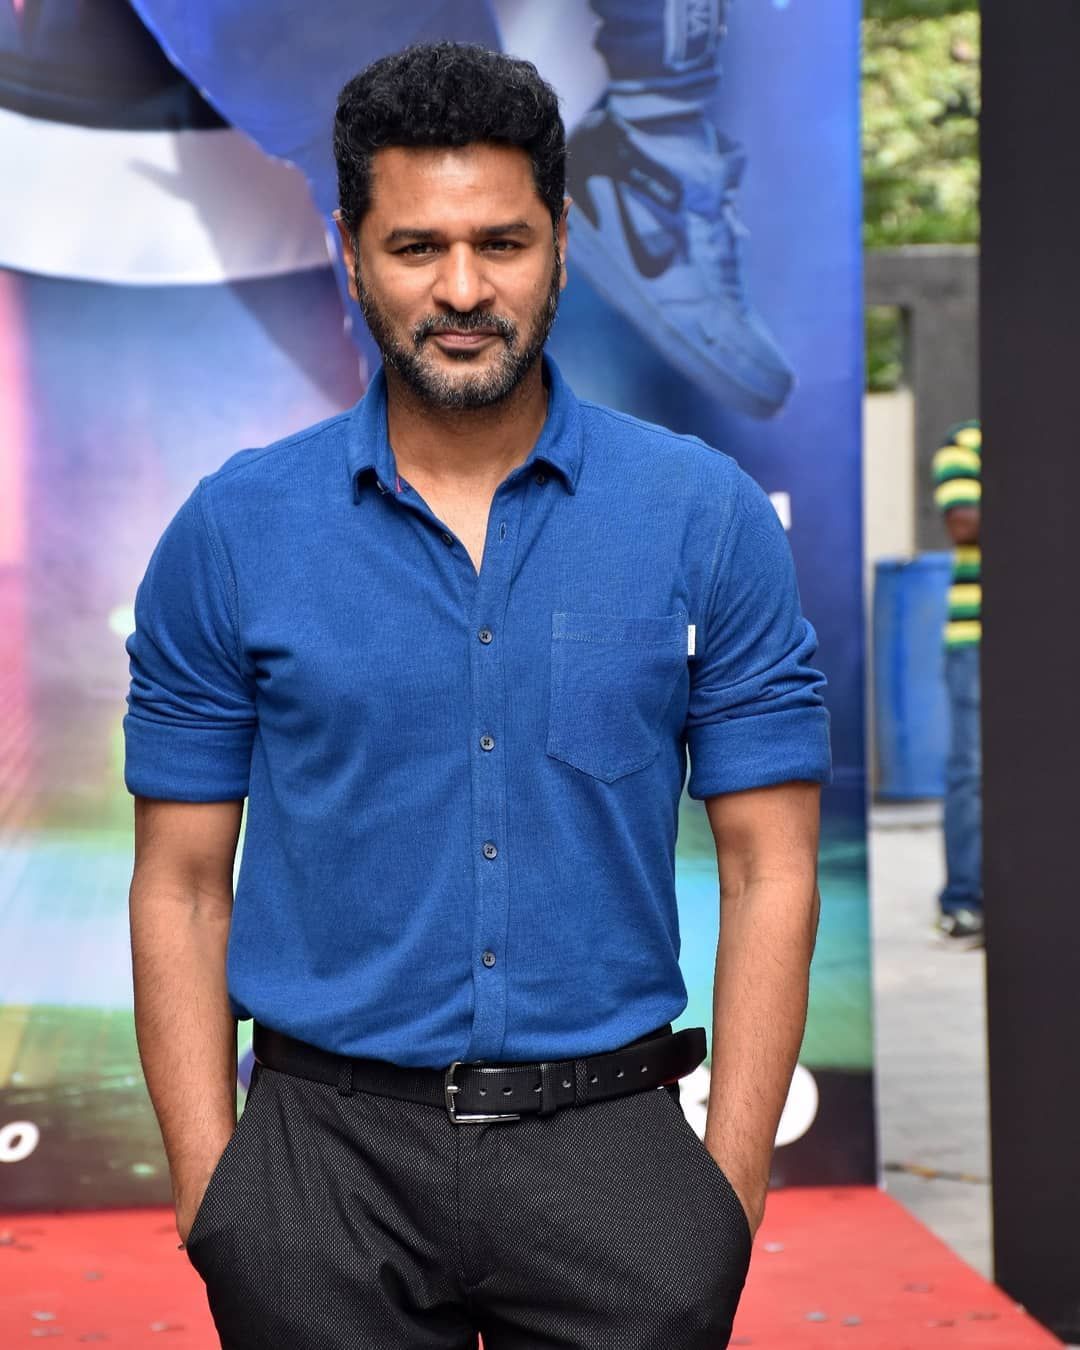 Prabhu Deva's Brother Confirms Choreographer's Second Marriage To His Physiotherapist; Couple Tied The Knot In May